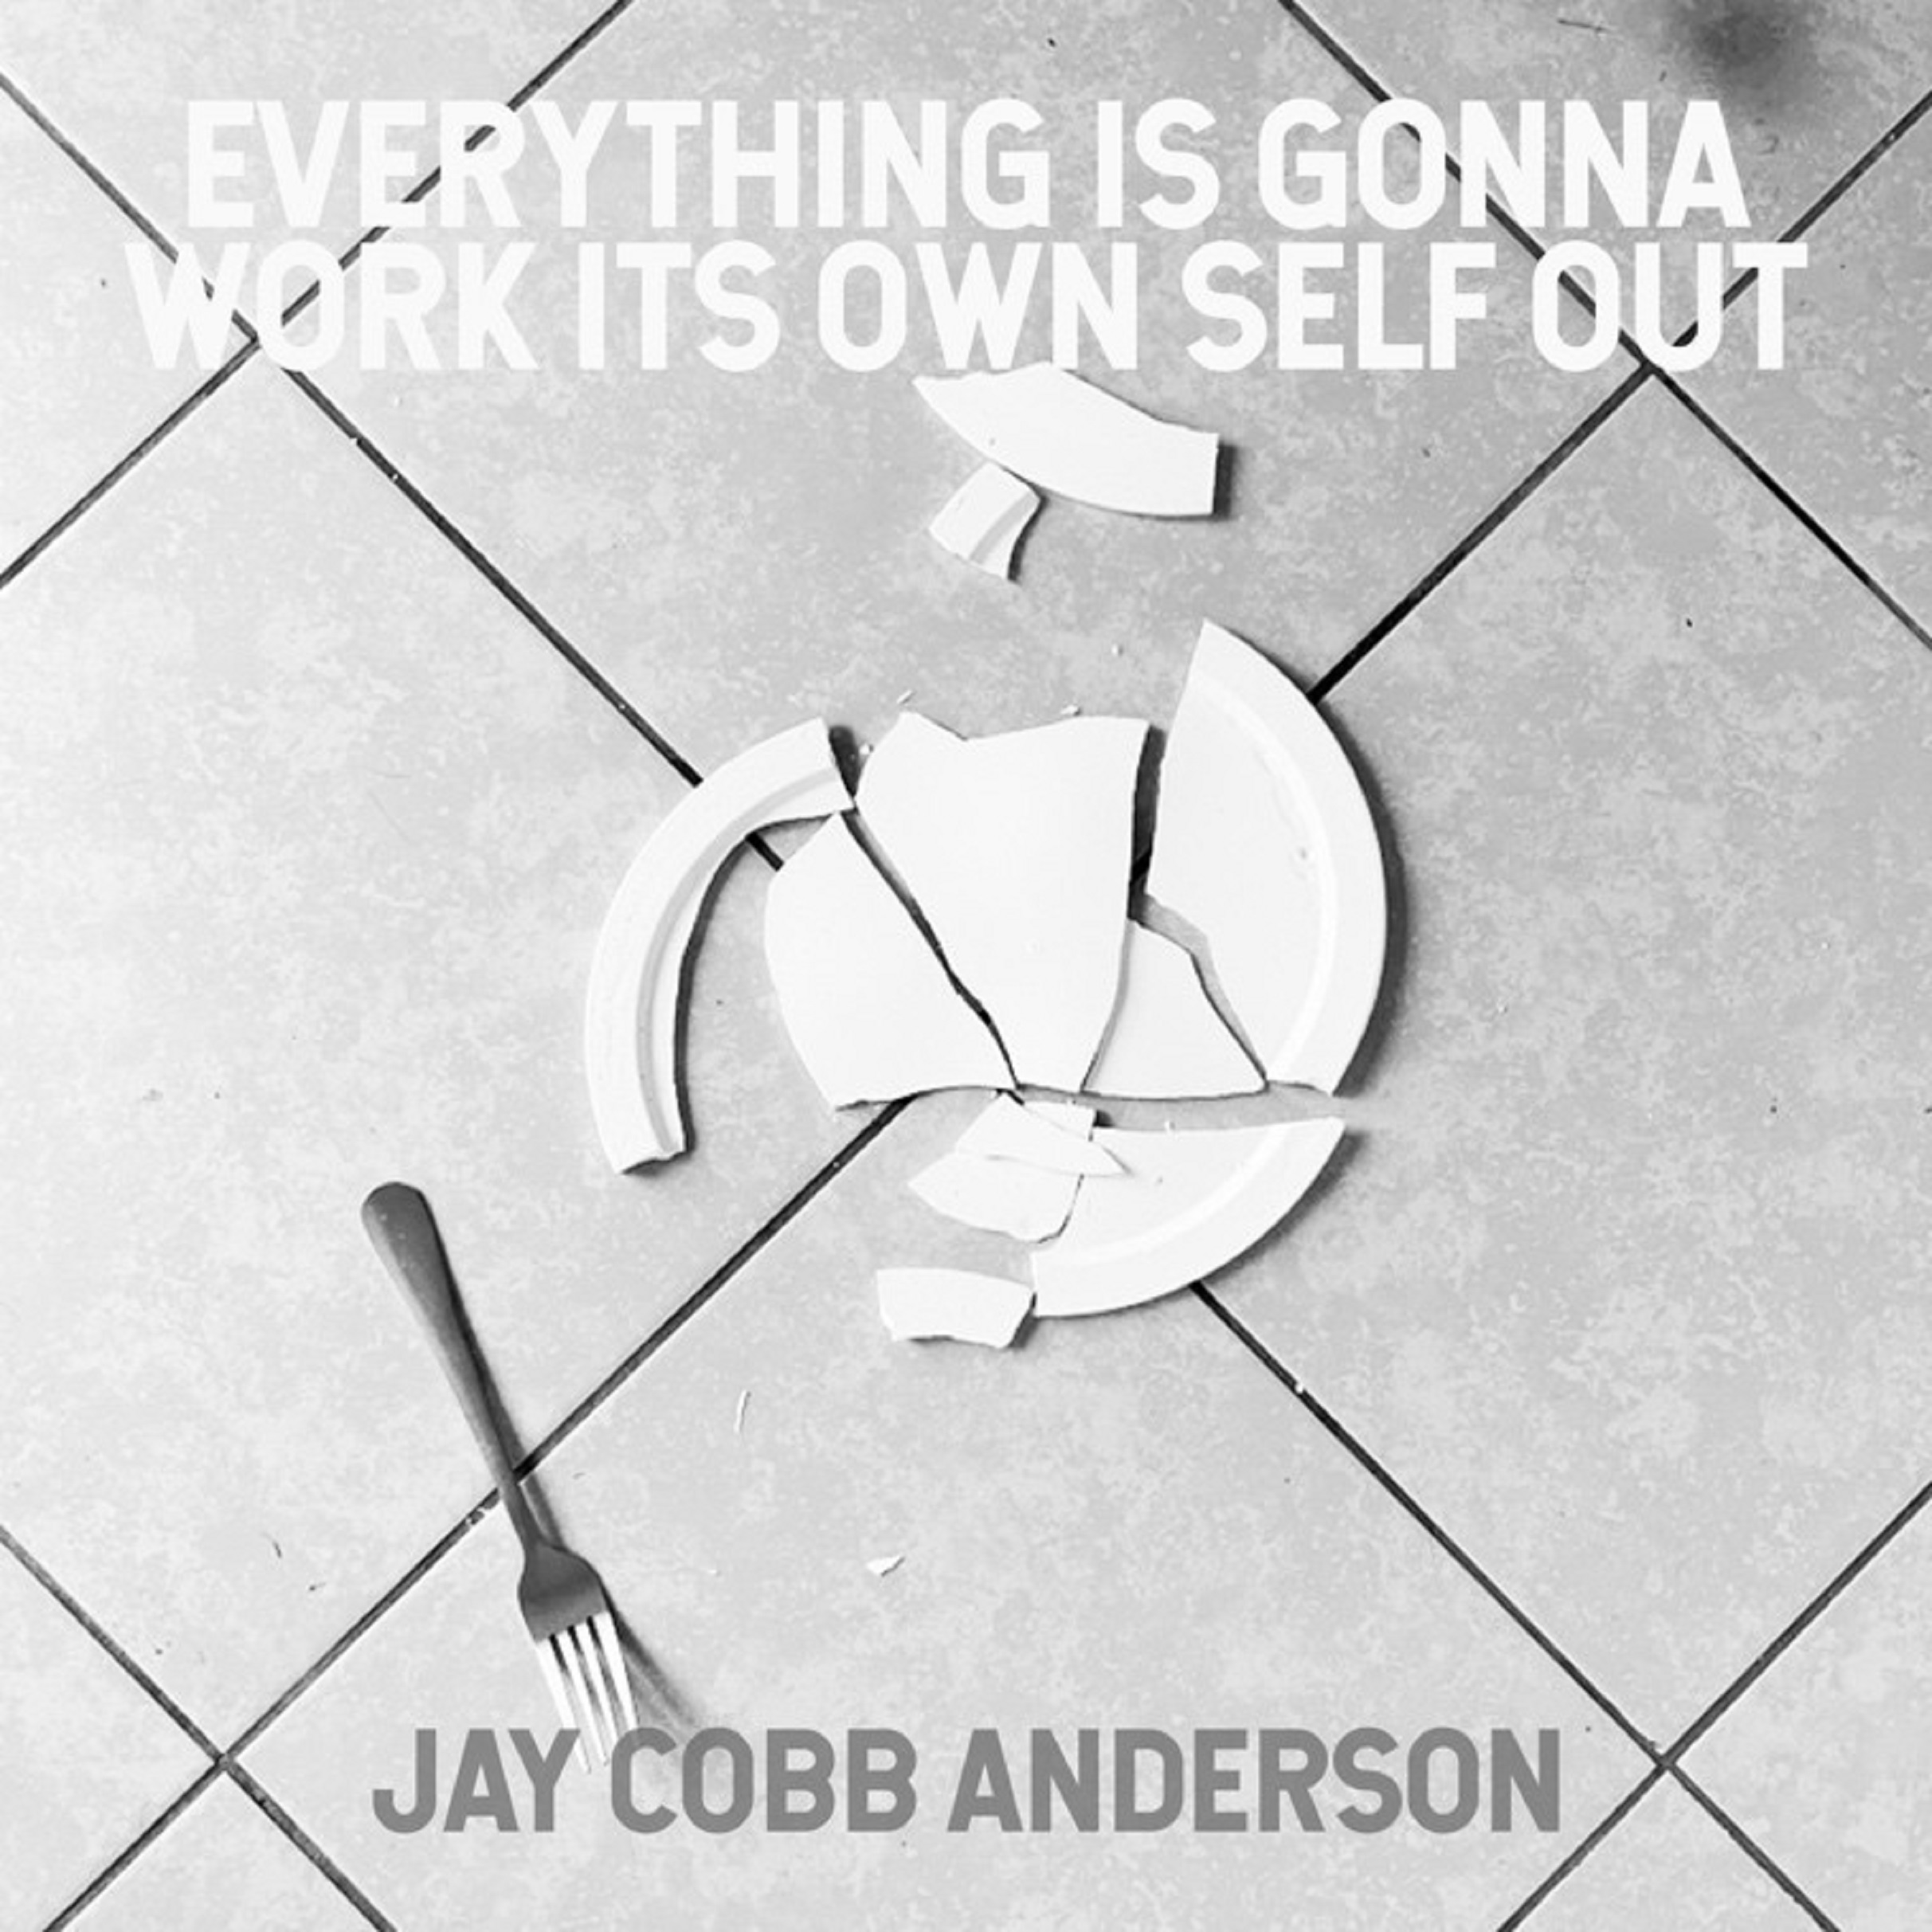 Jay Cobb Anderson Releases Second Single from upcoming EP "Everything Is Gonna Work Its Own Self Out"